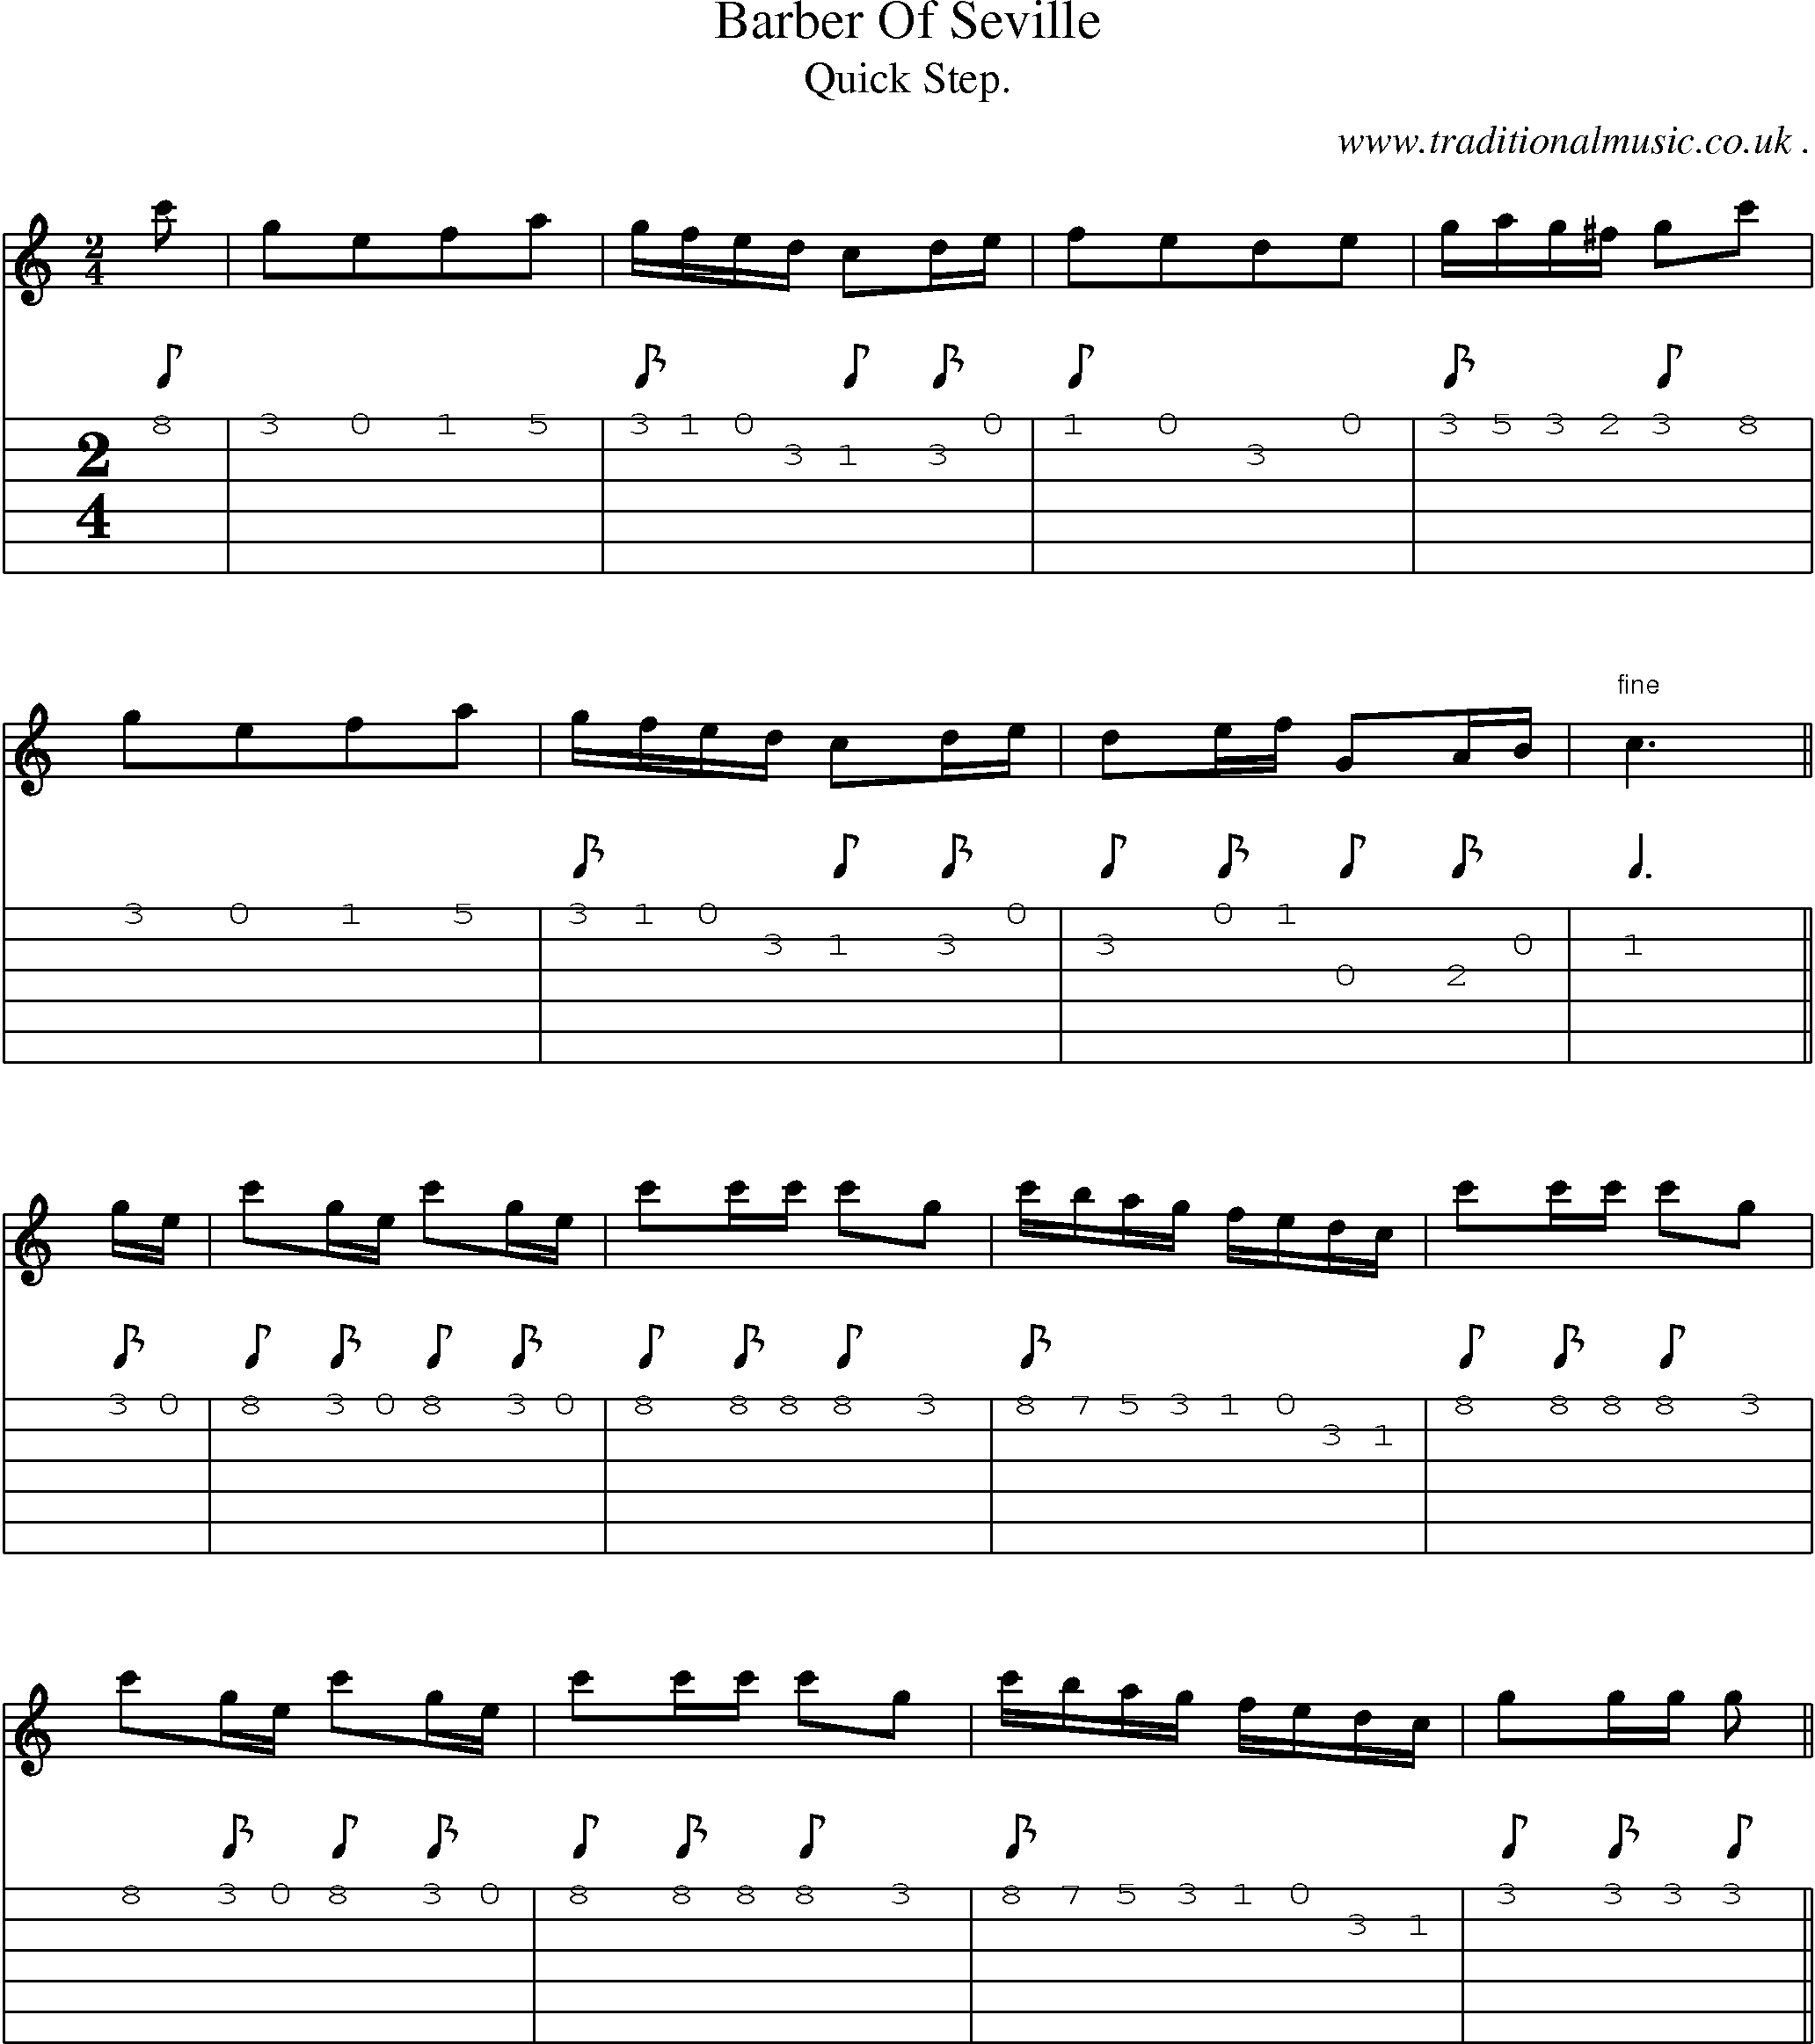 Sheet-Music and Guitar Tabs for Barber Of Seville